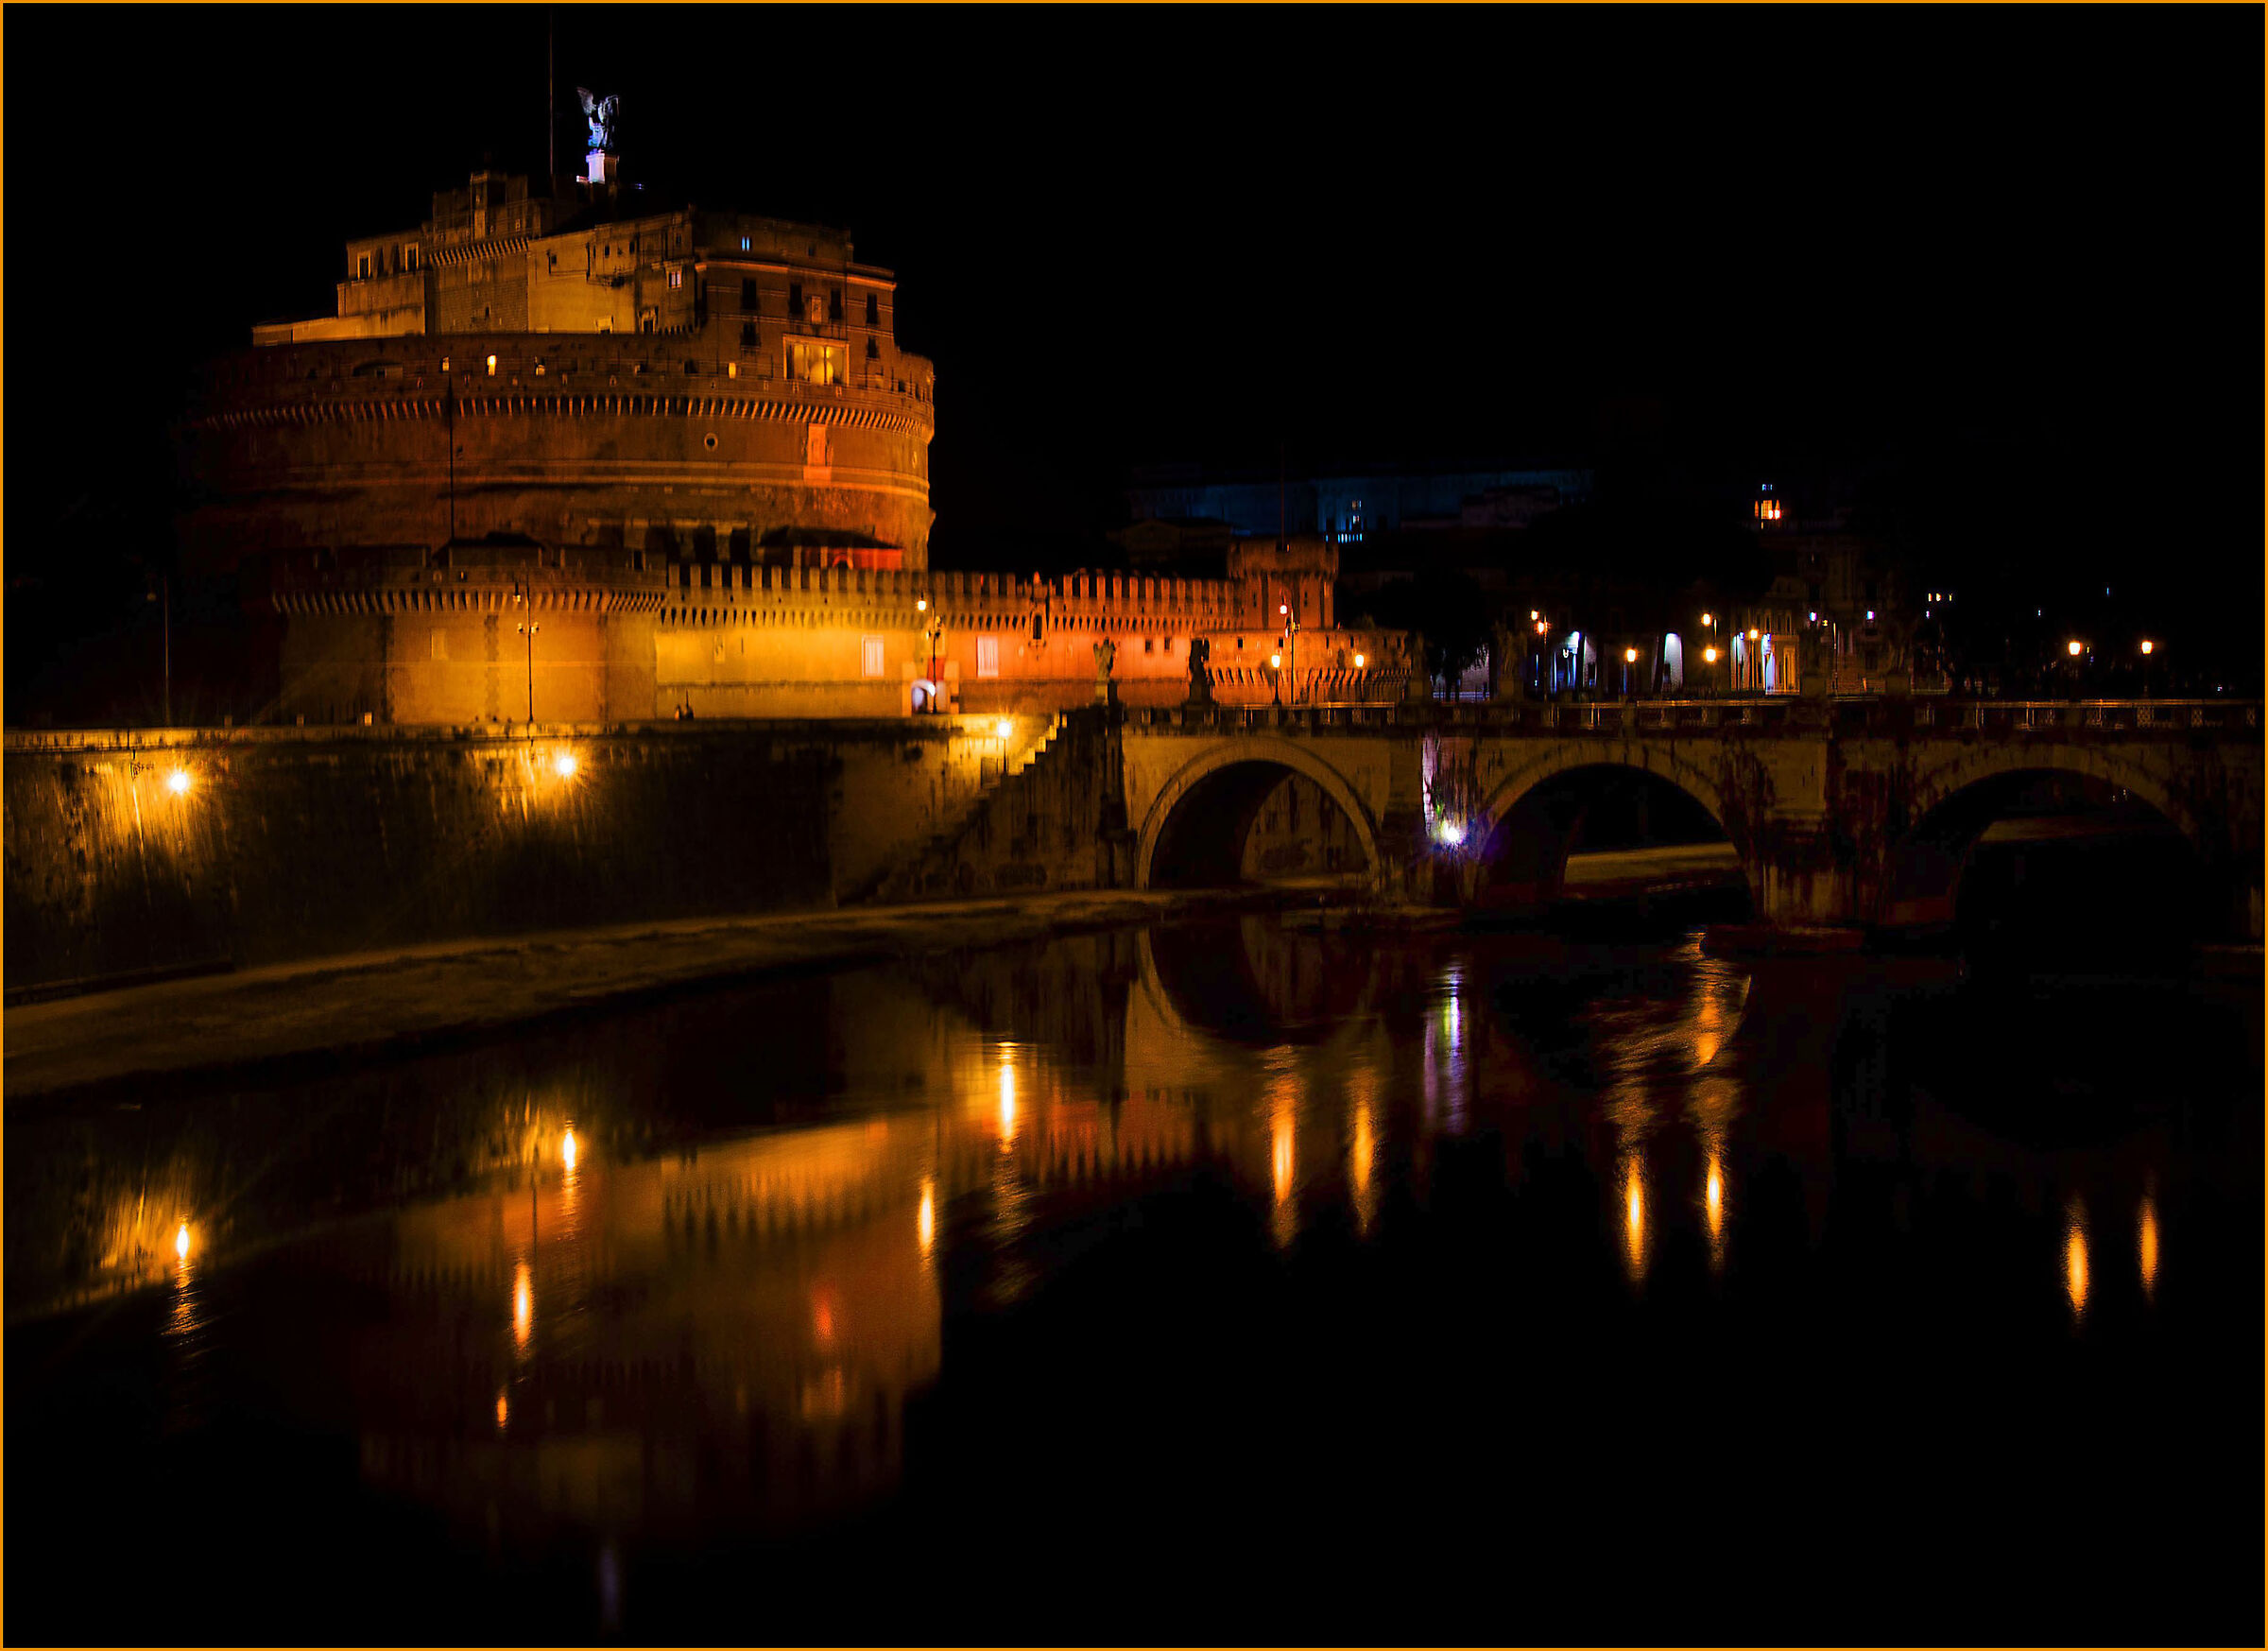 An evening in Rome...